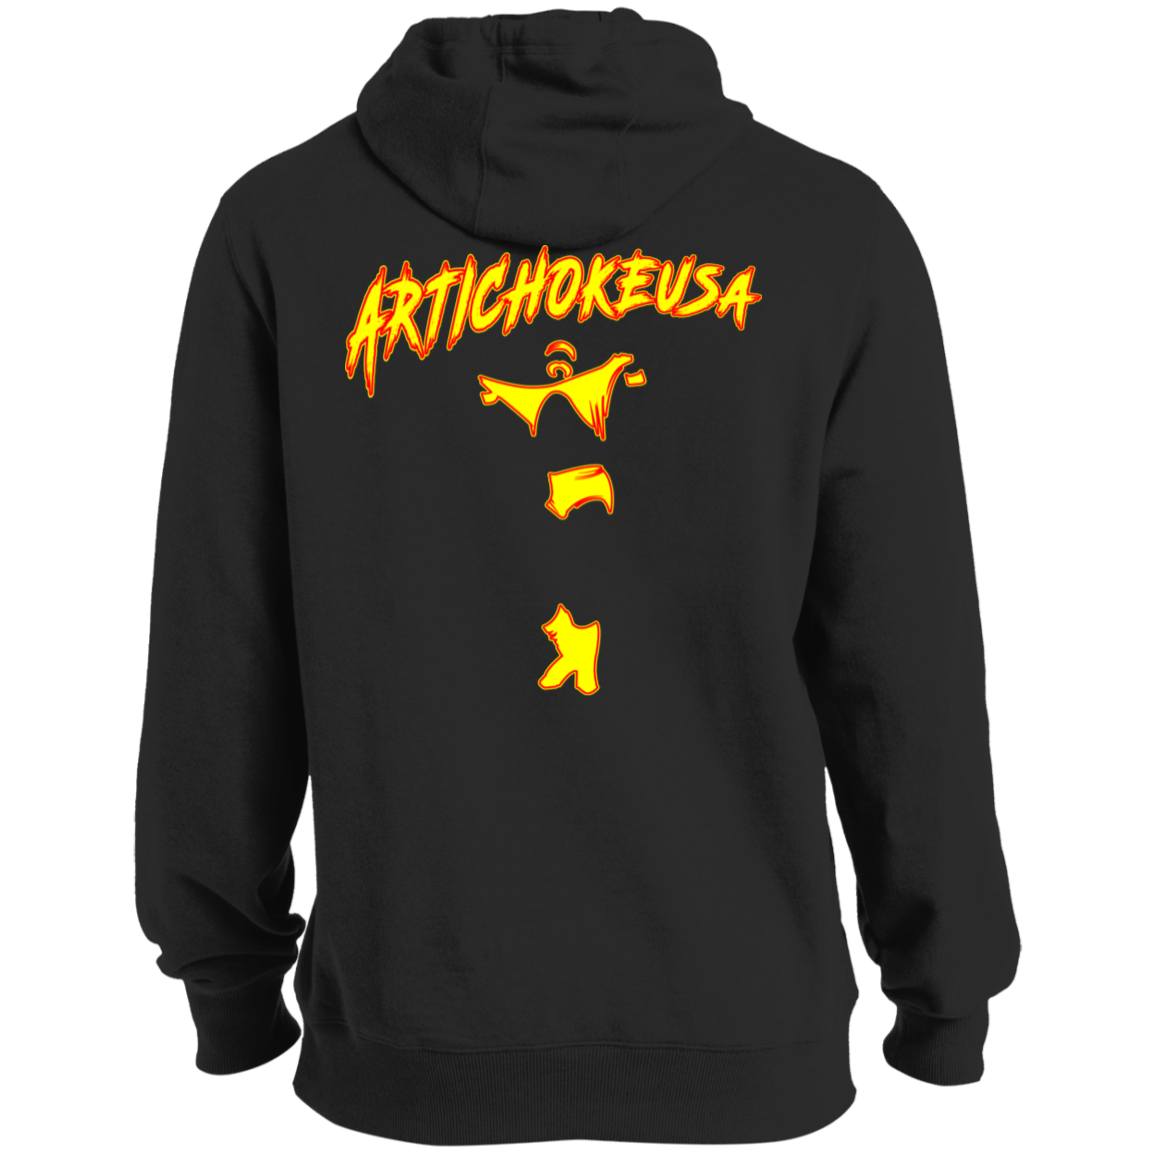 ArtichokeUSA Character and Font Design. Let’s Create Your Own Design Today. Fan Art. The Hulkster. Tall Pullover Hoodie